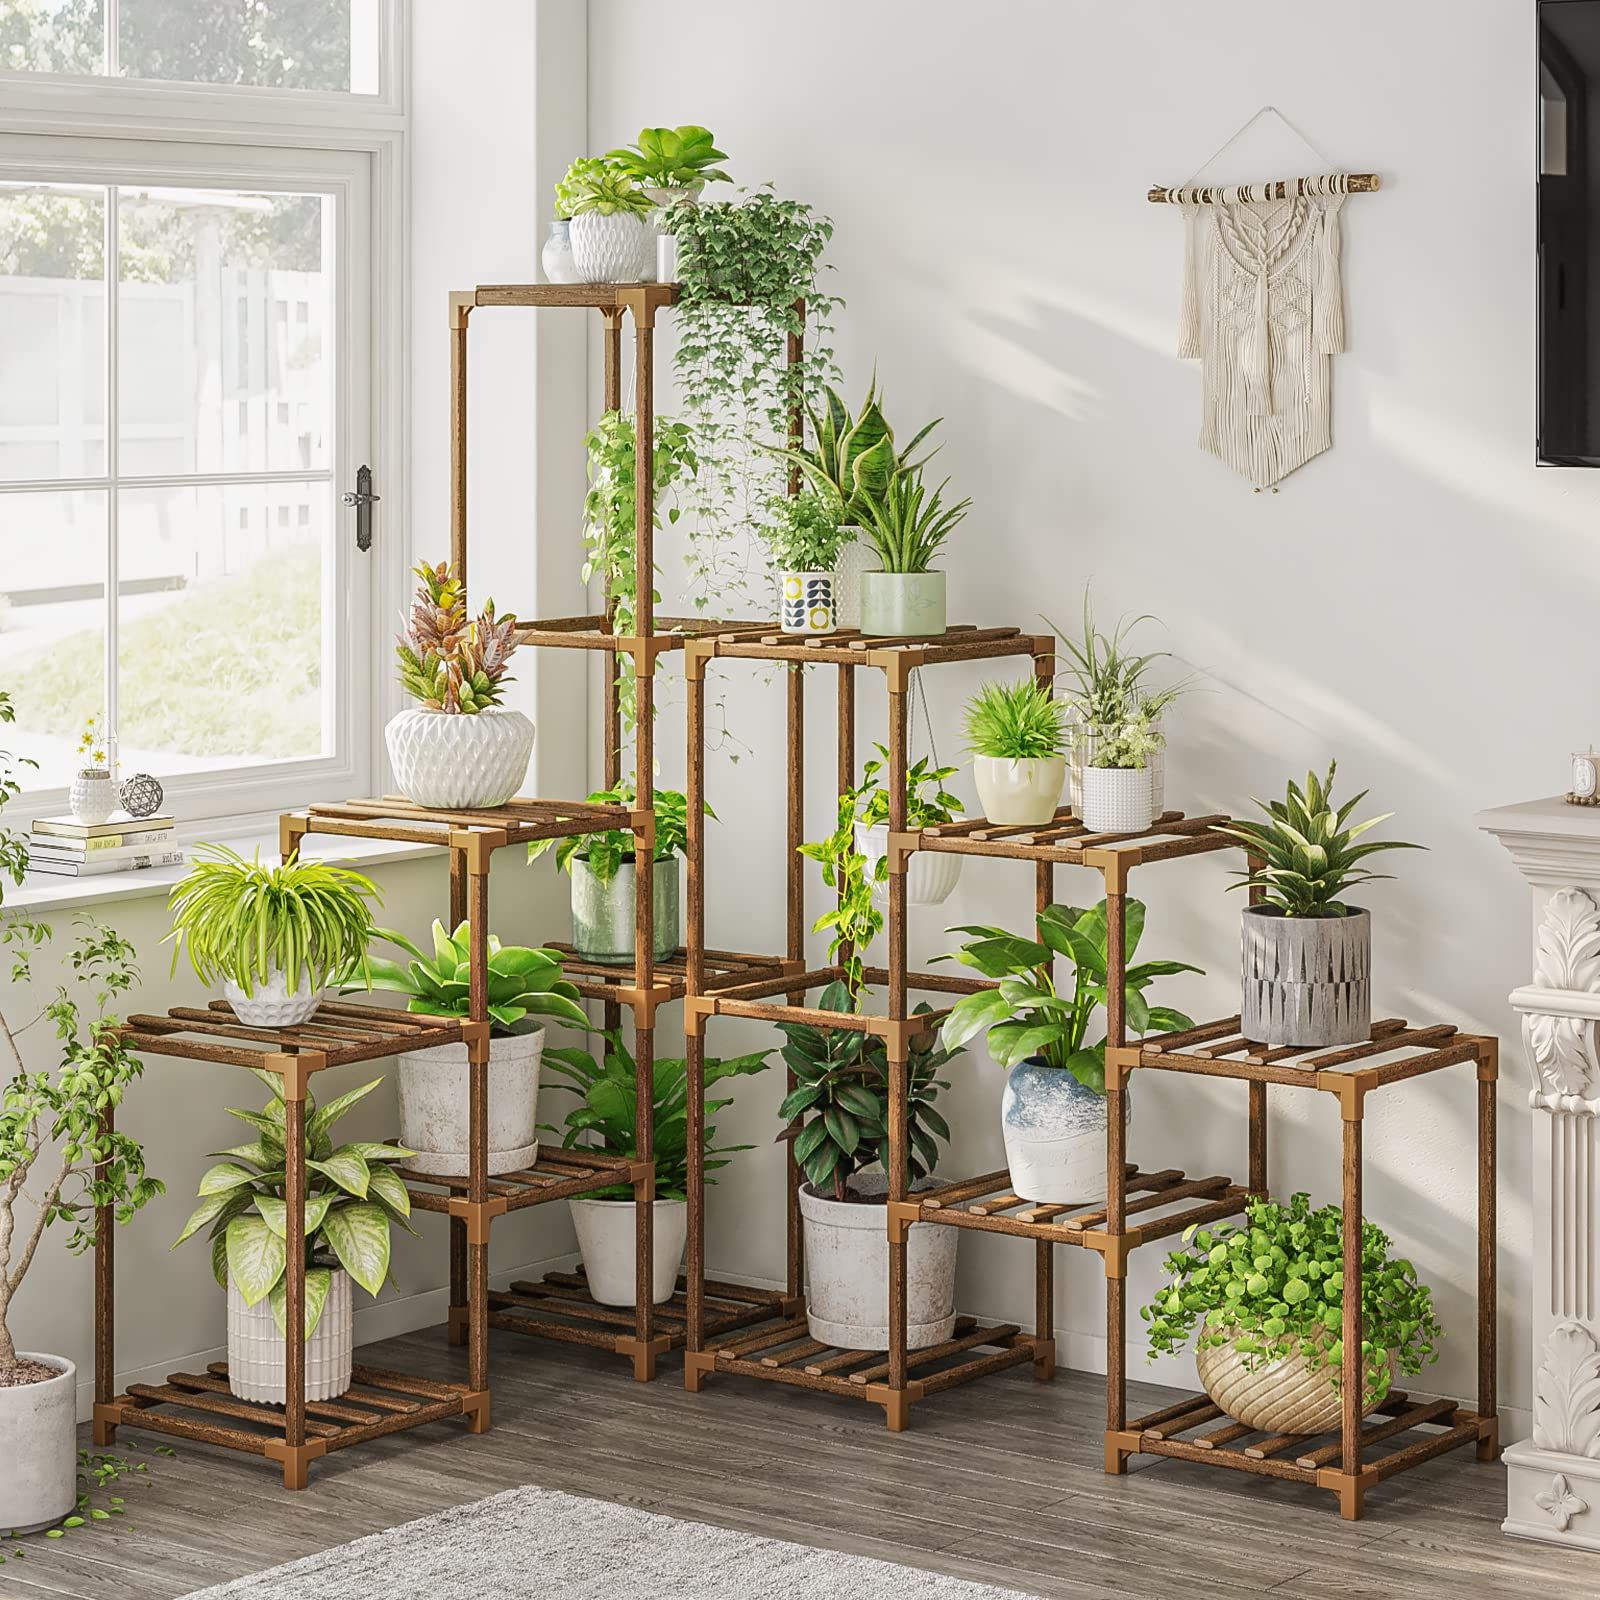 Best And Newest Amazon: Bamworld Plant Stand Indoor Corner Plant Shelf Outdoor Flower  Shelves Wooden Plant Stands Garden Wood Plant Holder Rack For Living Room  Corner Lawn Window 03b : Everything Else In Wooden Plant Stands (View 6 of 10)